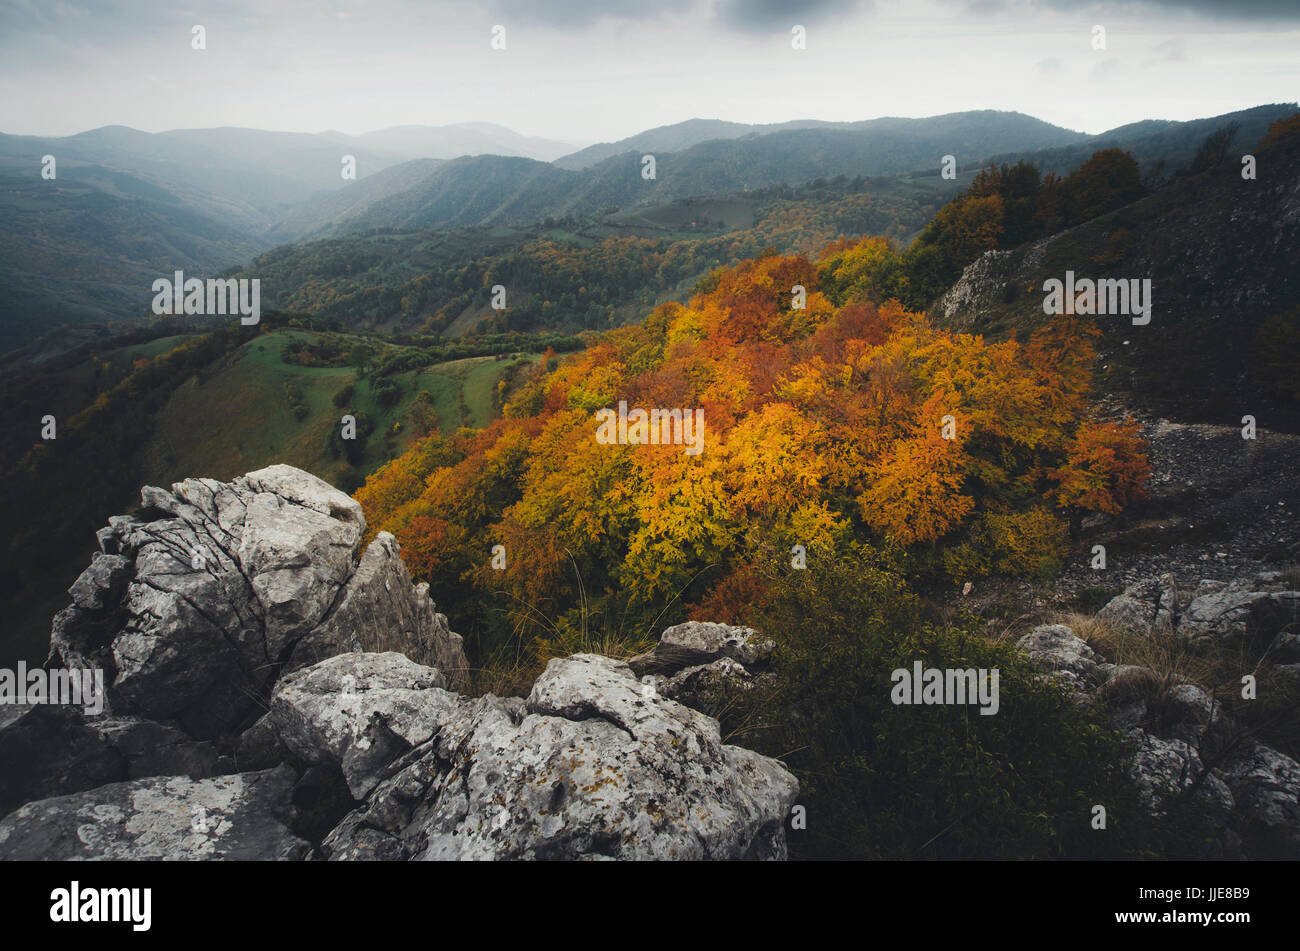 autumn landscape with hills, mountains and trees with colorful foliage Stock Photo